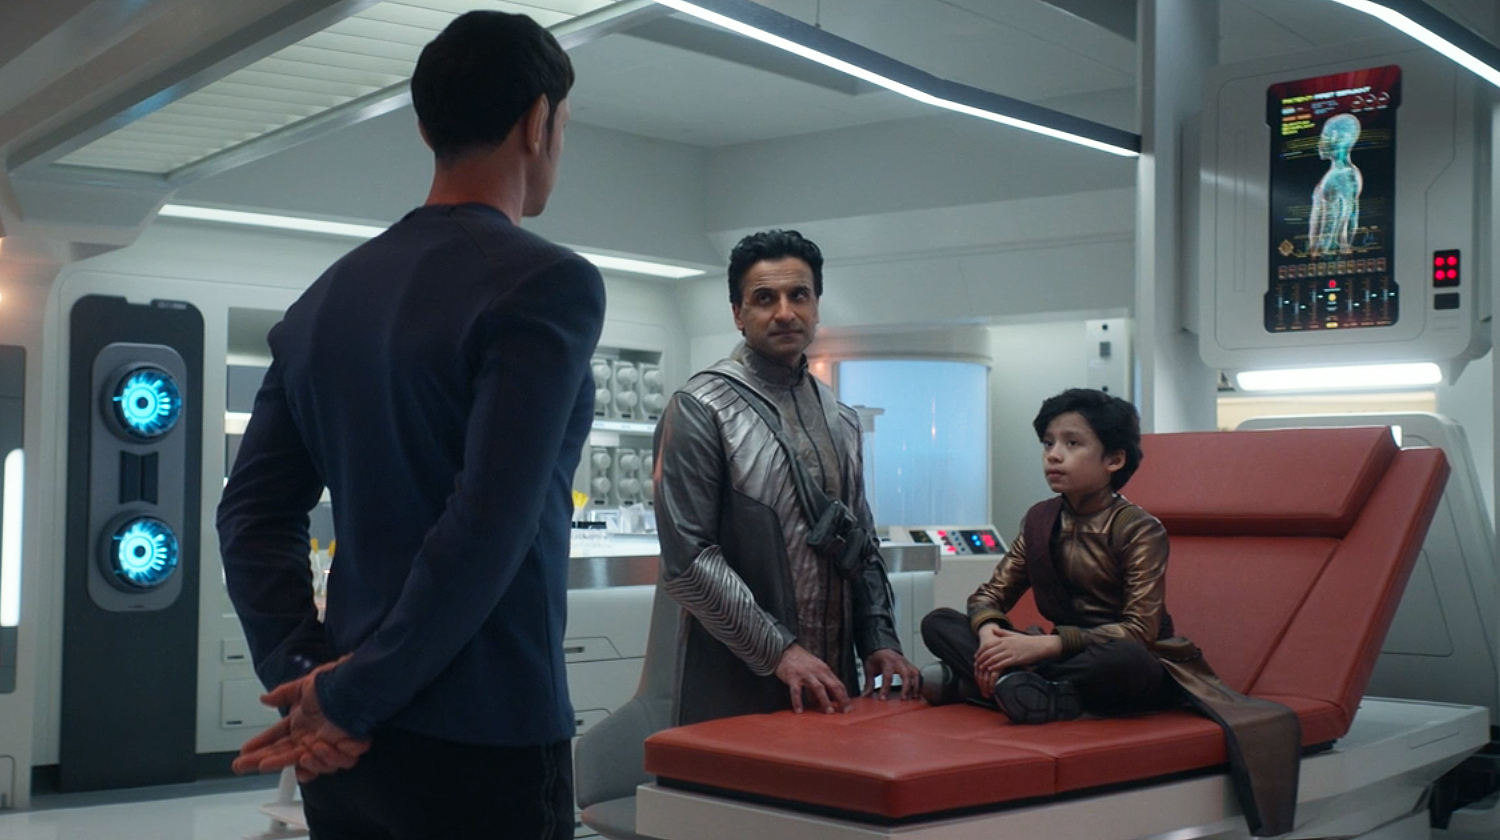 Spock in the infirmary with the young First Servant of the Majalan people.